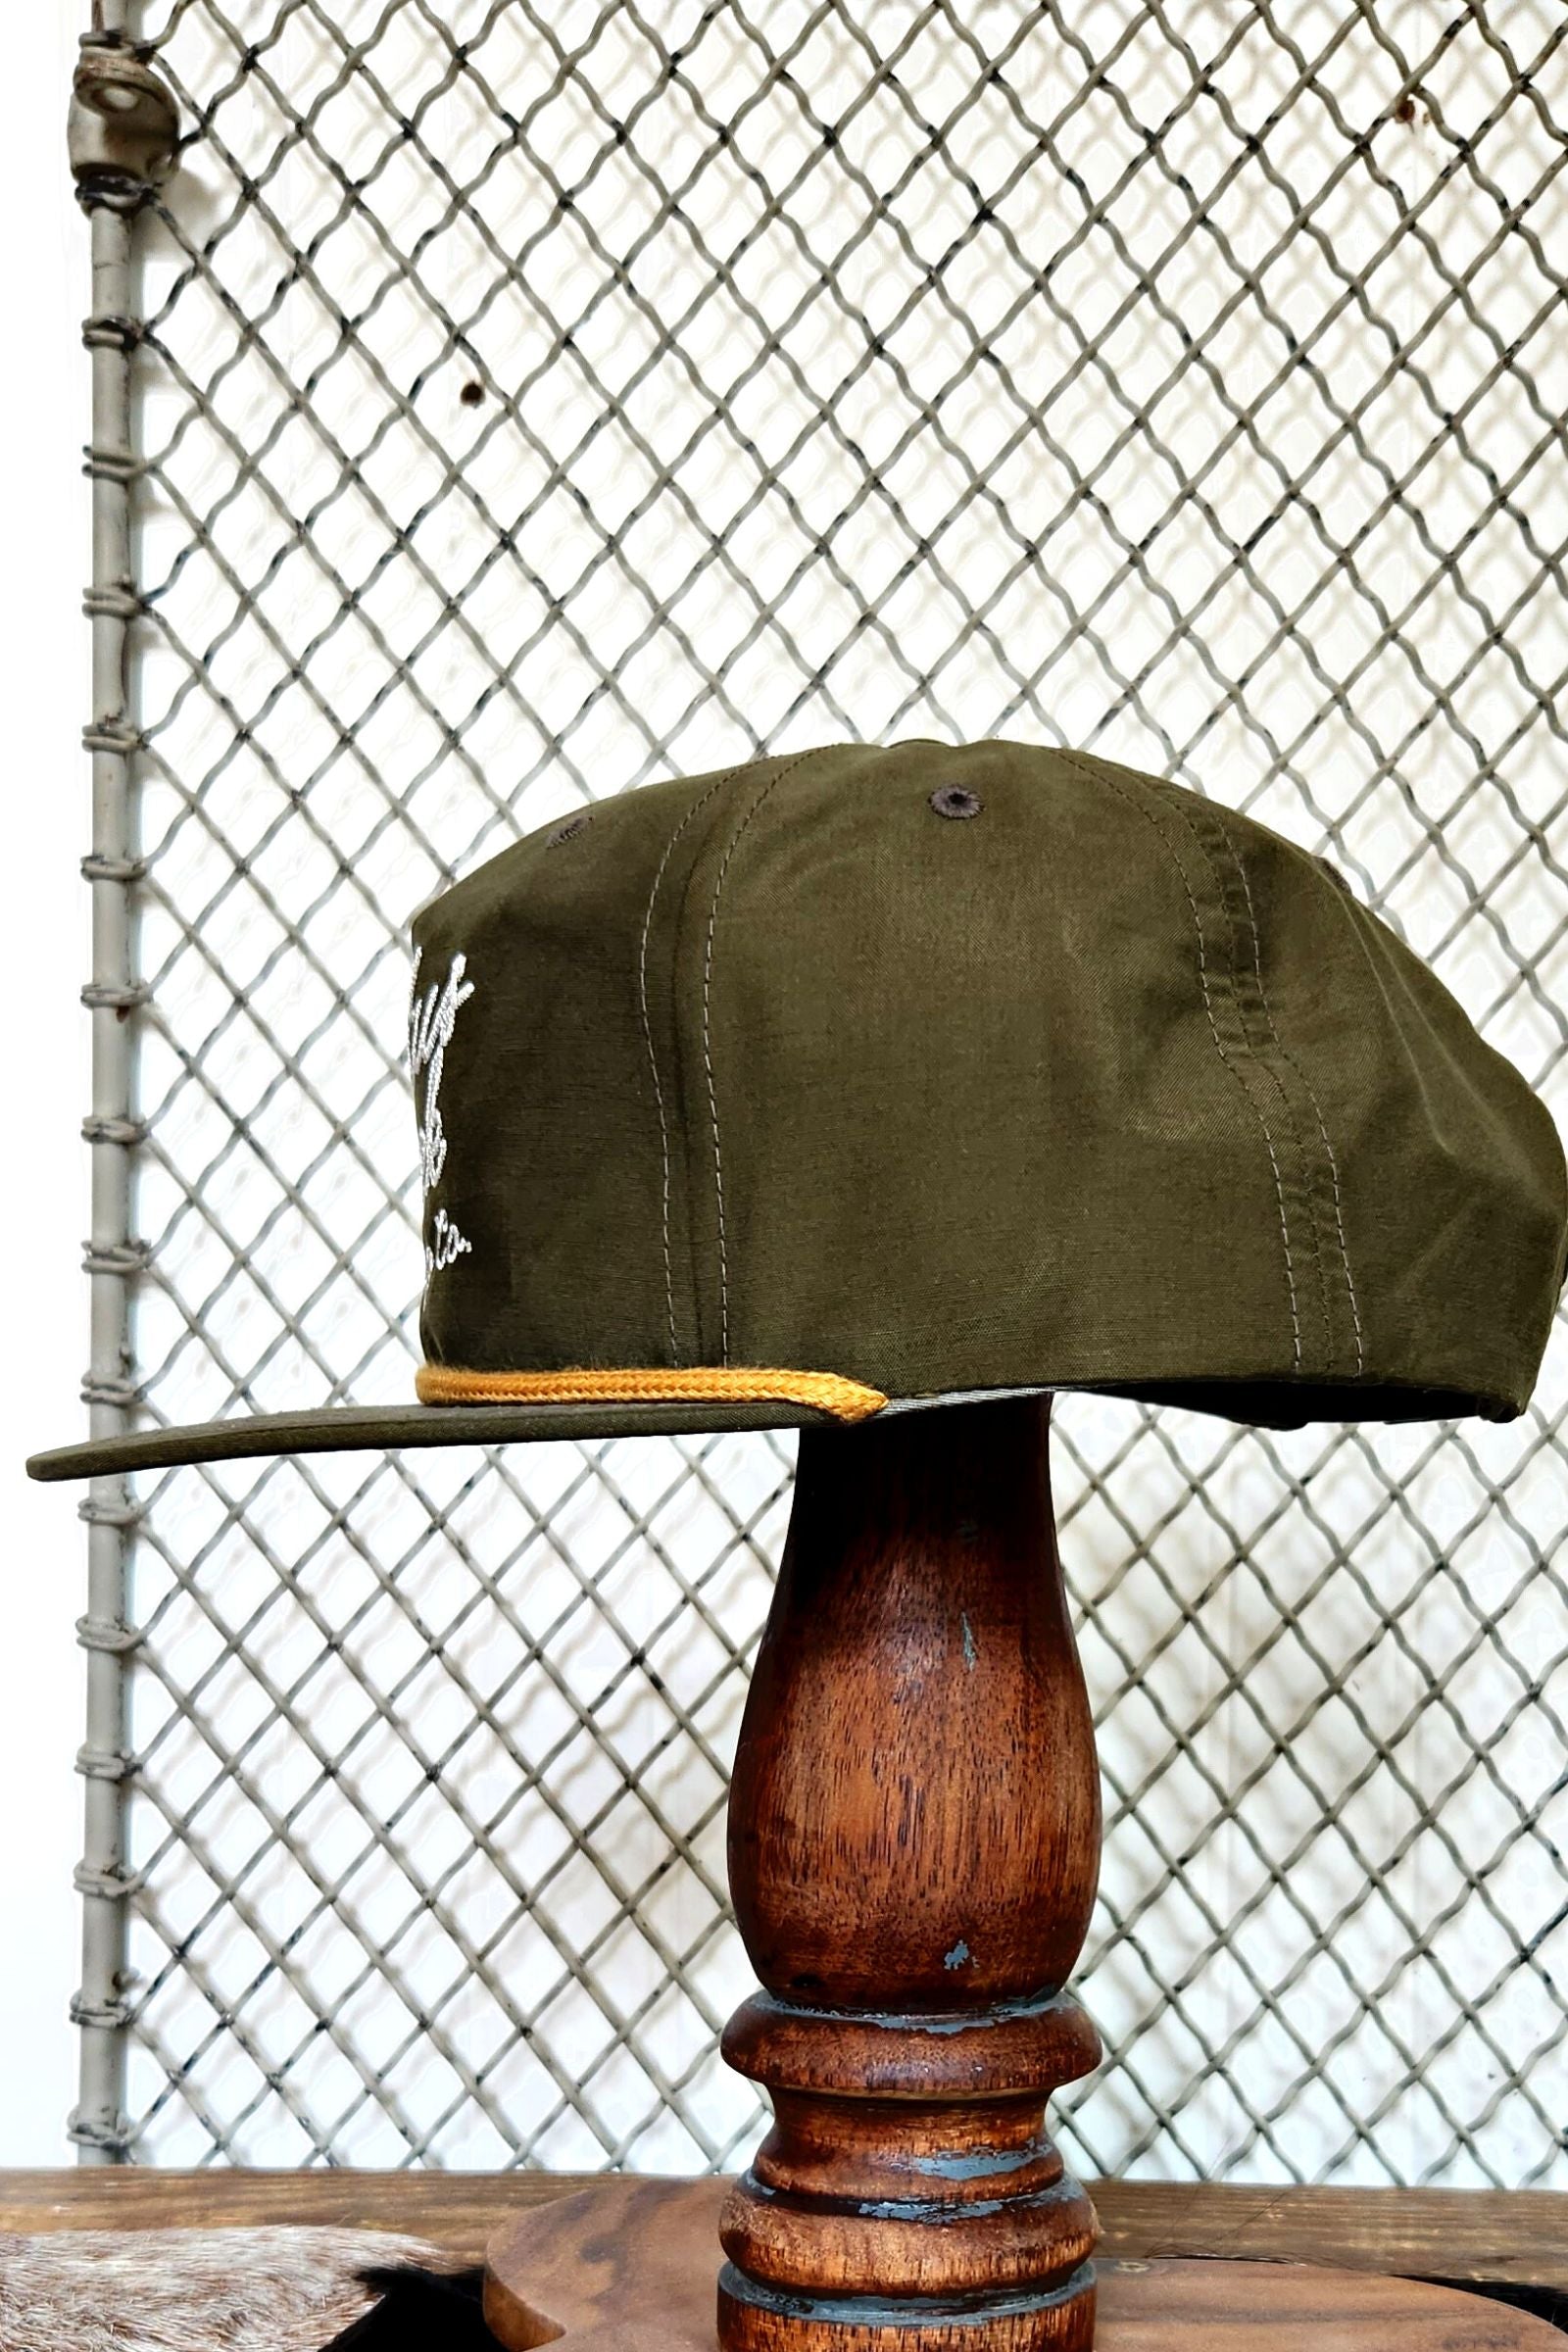 Cactus Creek Trading Co. Olive Hat